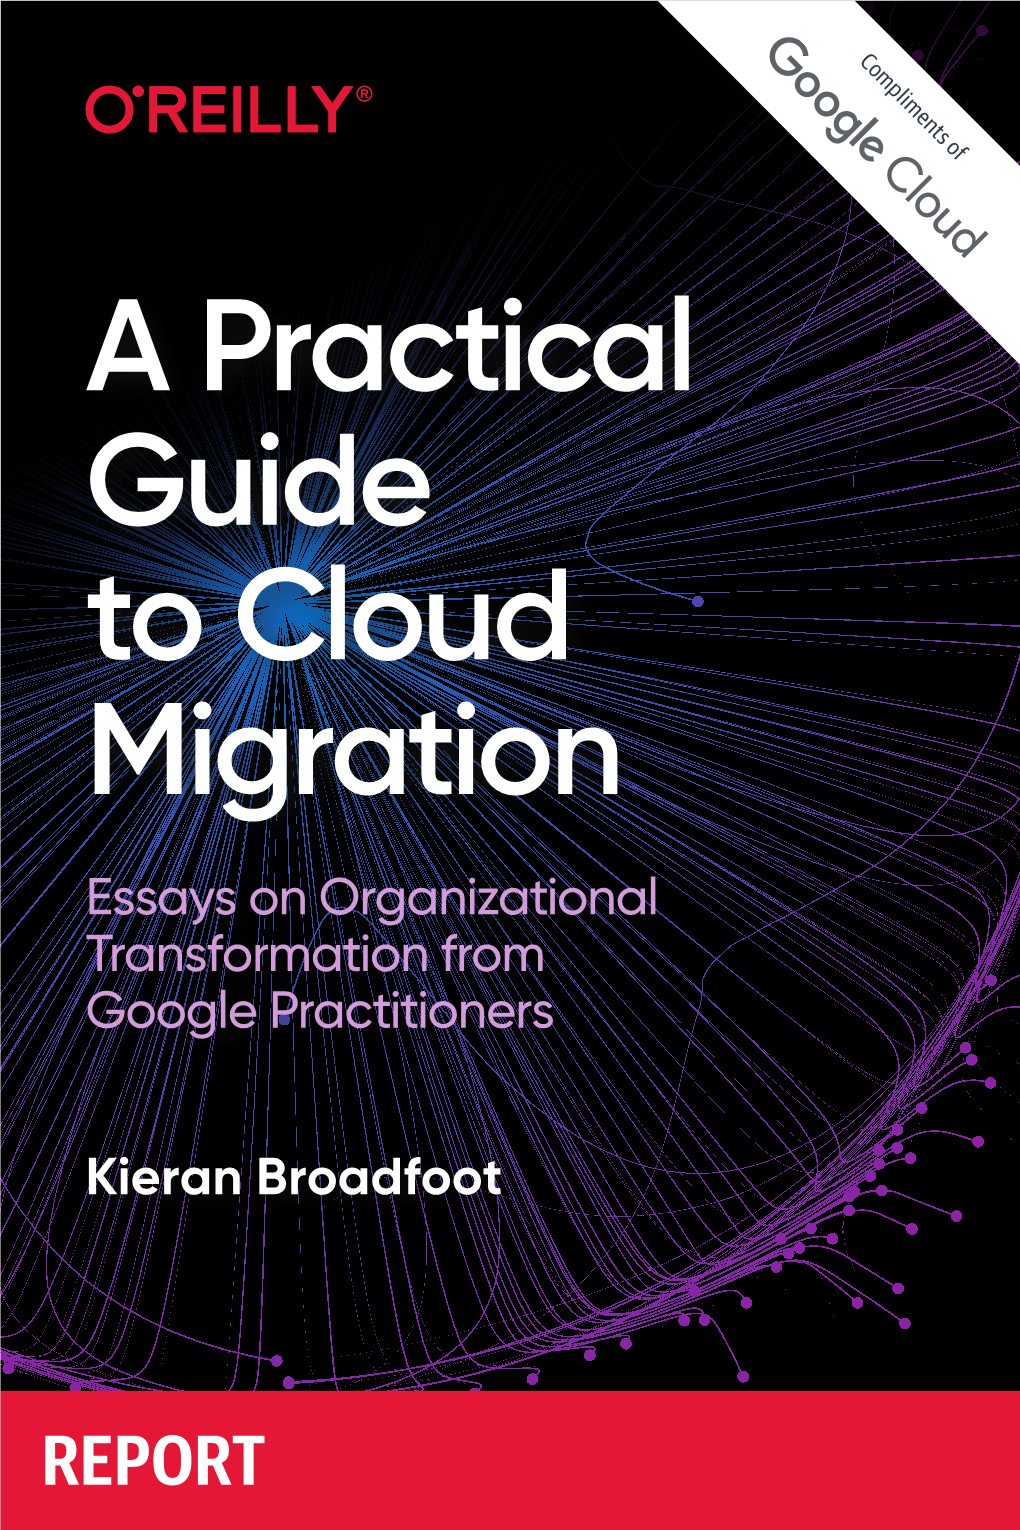 A Practical Guide to Cloud Migration Essays on Organizational Transformation from Google Practitioners